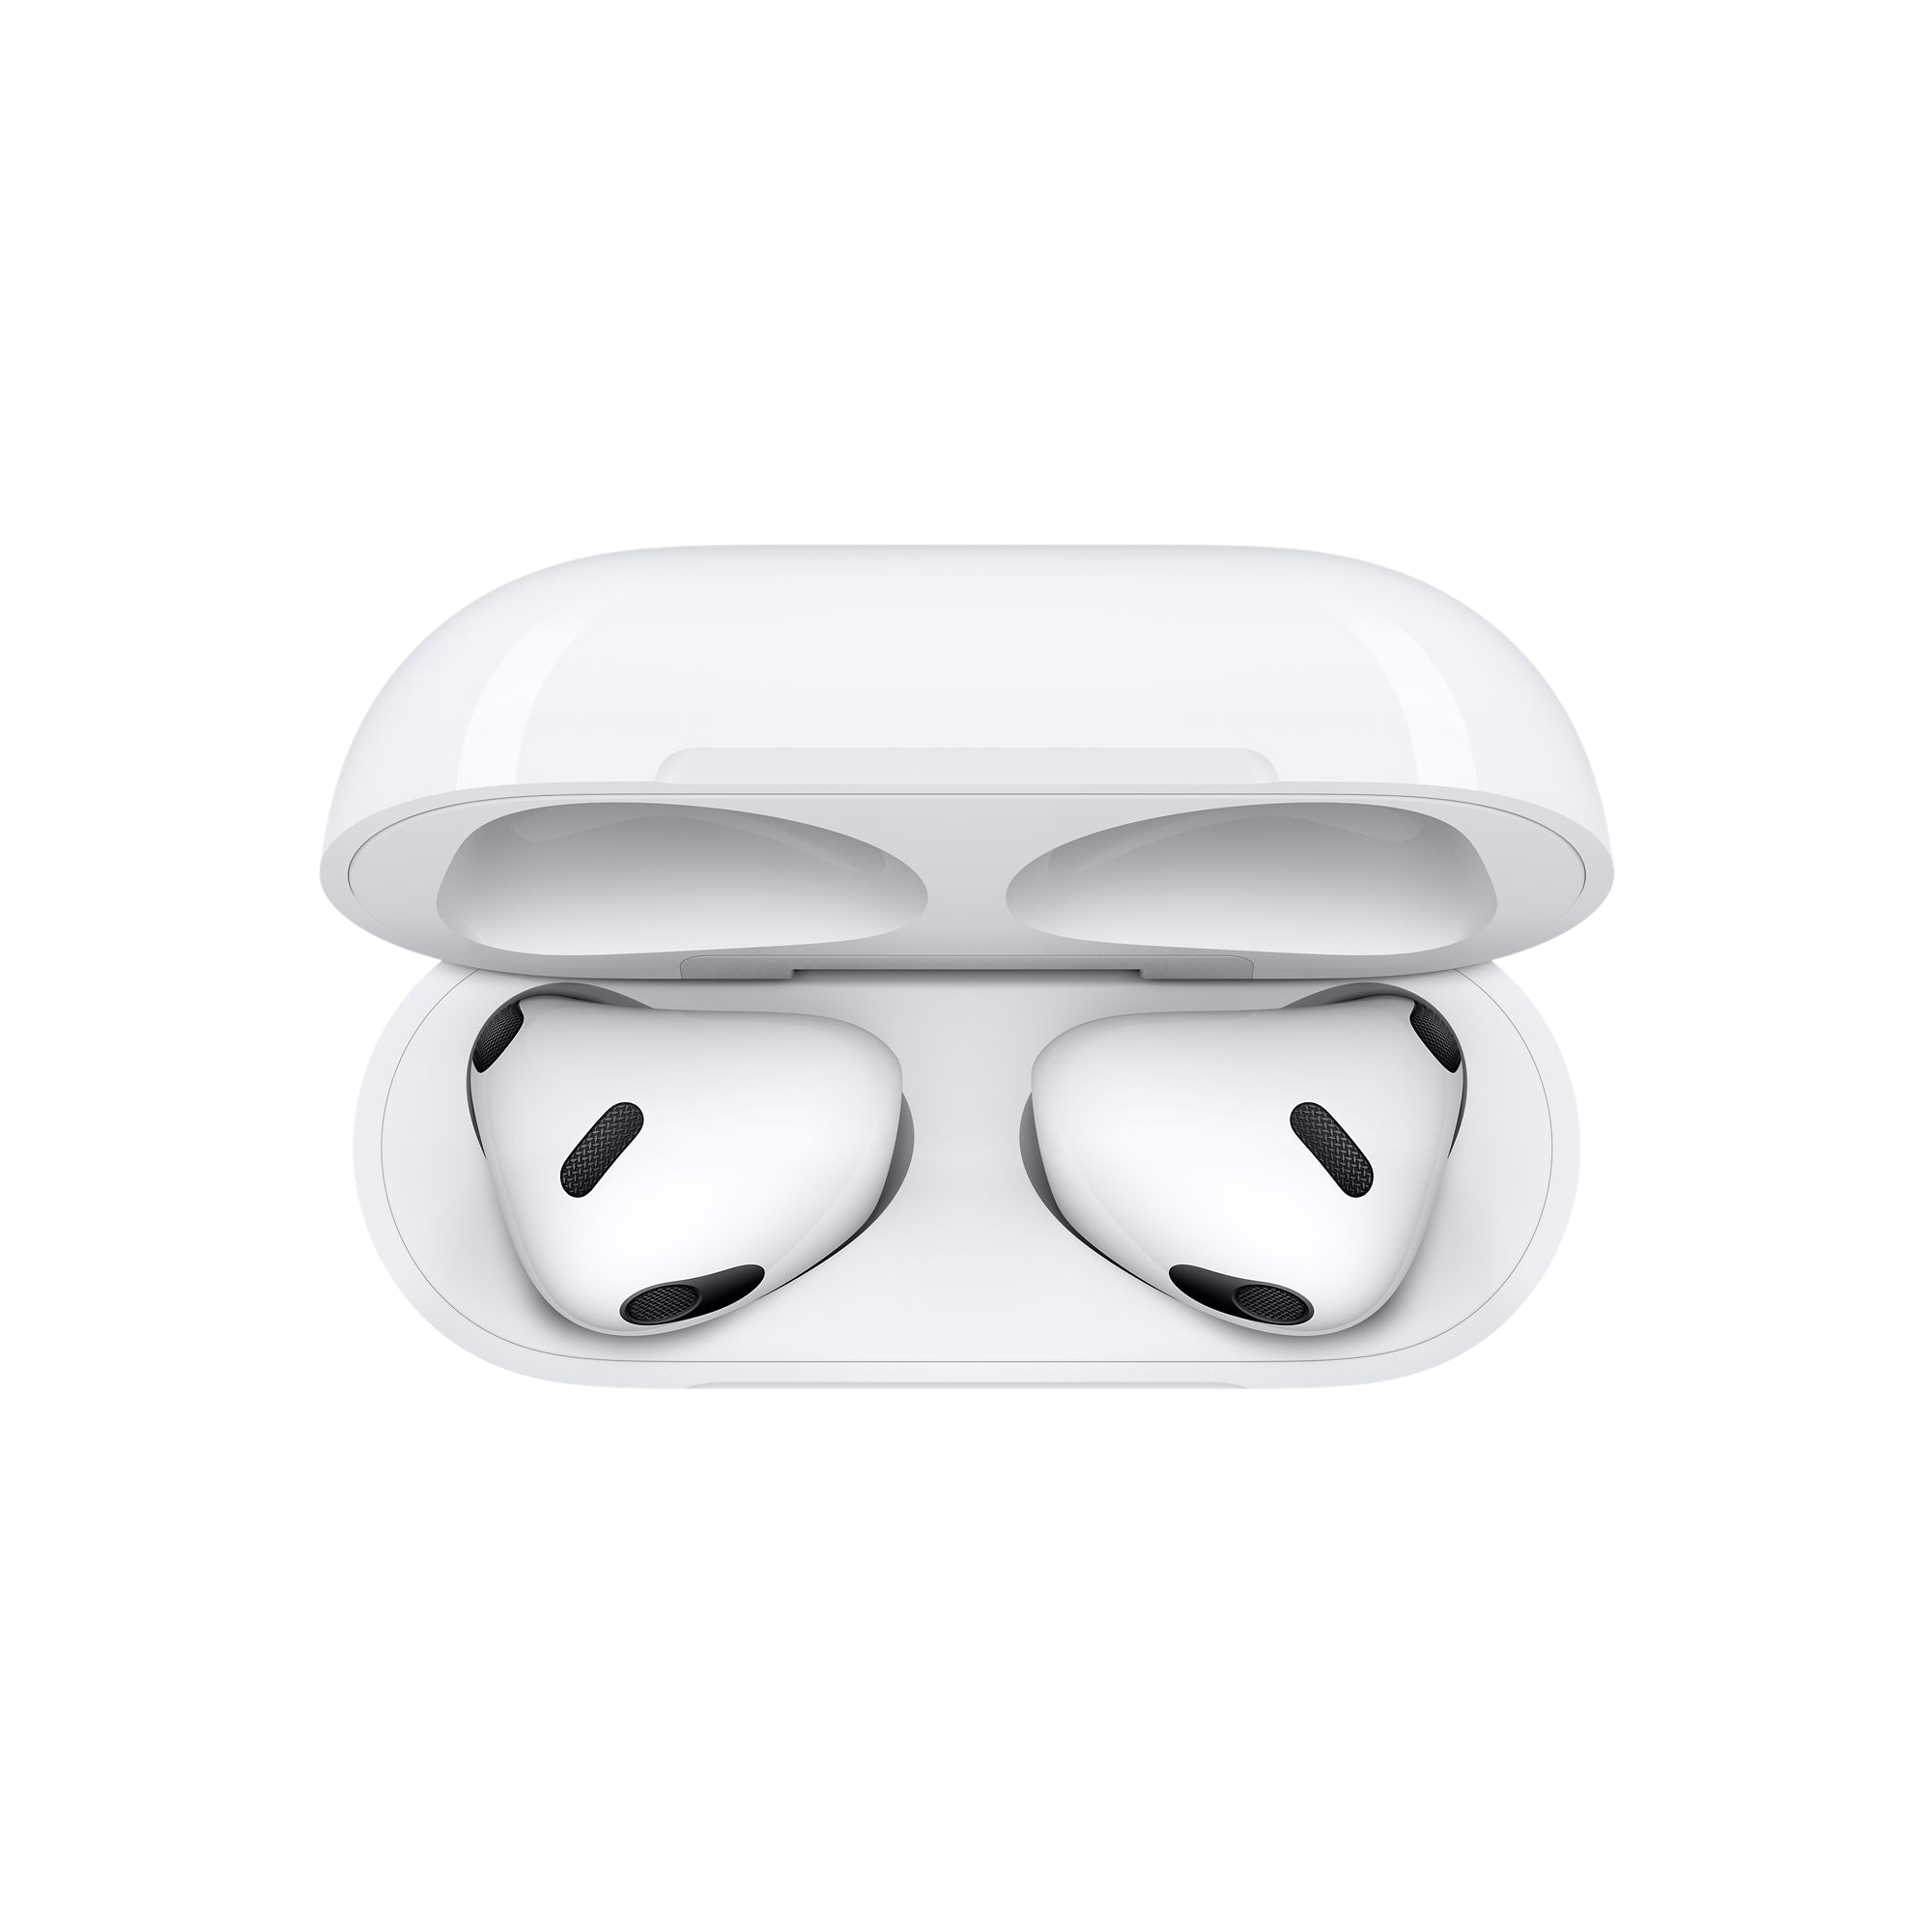 White Apple AirPods 3 In-ear Bluetooth Headphones.3